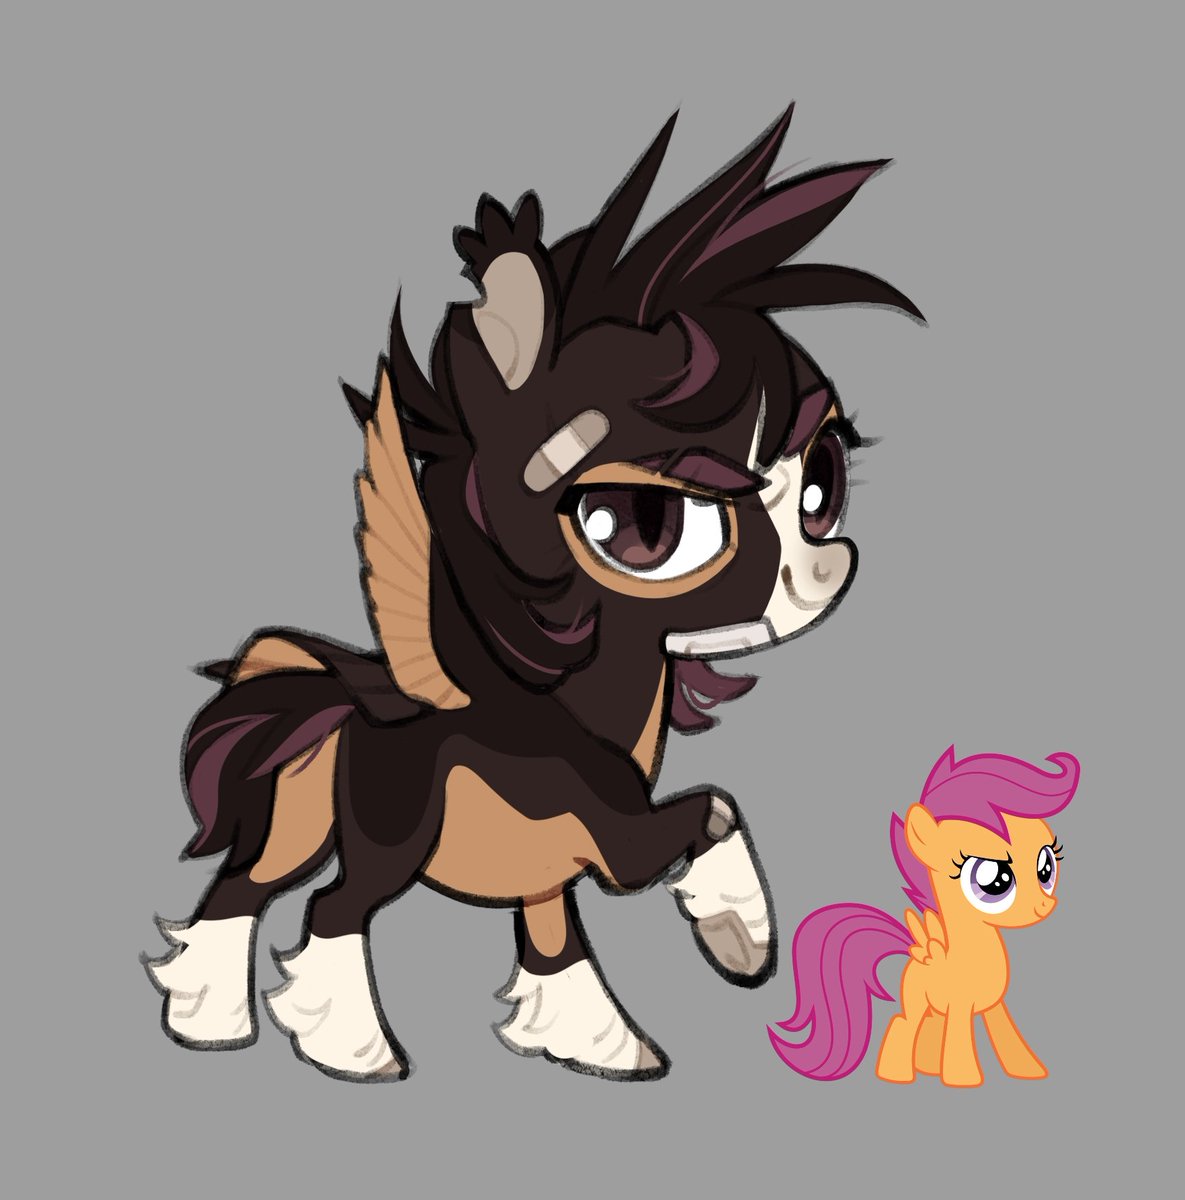 Scootaloo! I kinda went off on real horse coat colors and patterns and wanted to give her seal brown, also thought to emphasize her being more clumsy visually. In the cartoon her wings flapped fast so I kinda gave her tiny hummingbird wings to emphasize while keeping disability